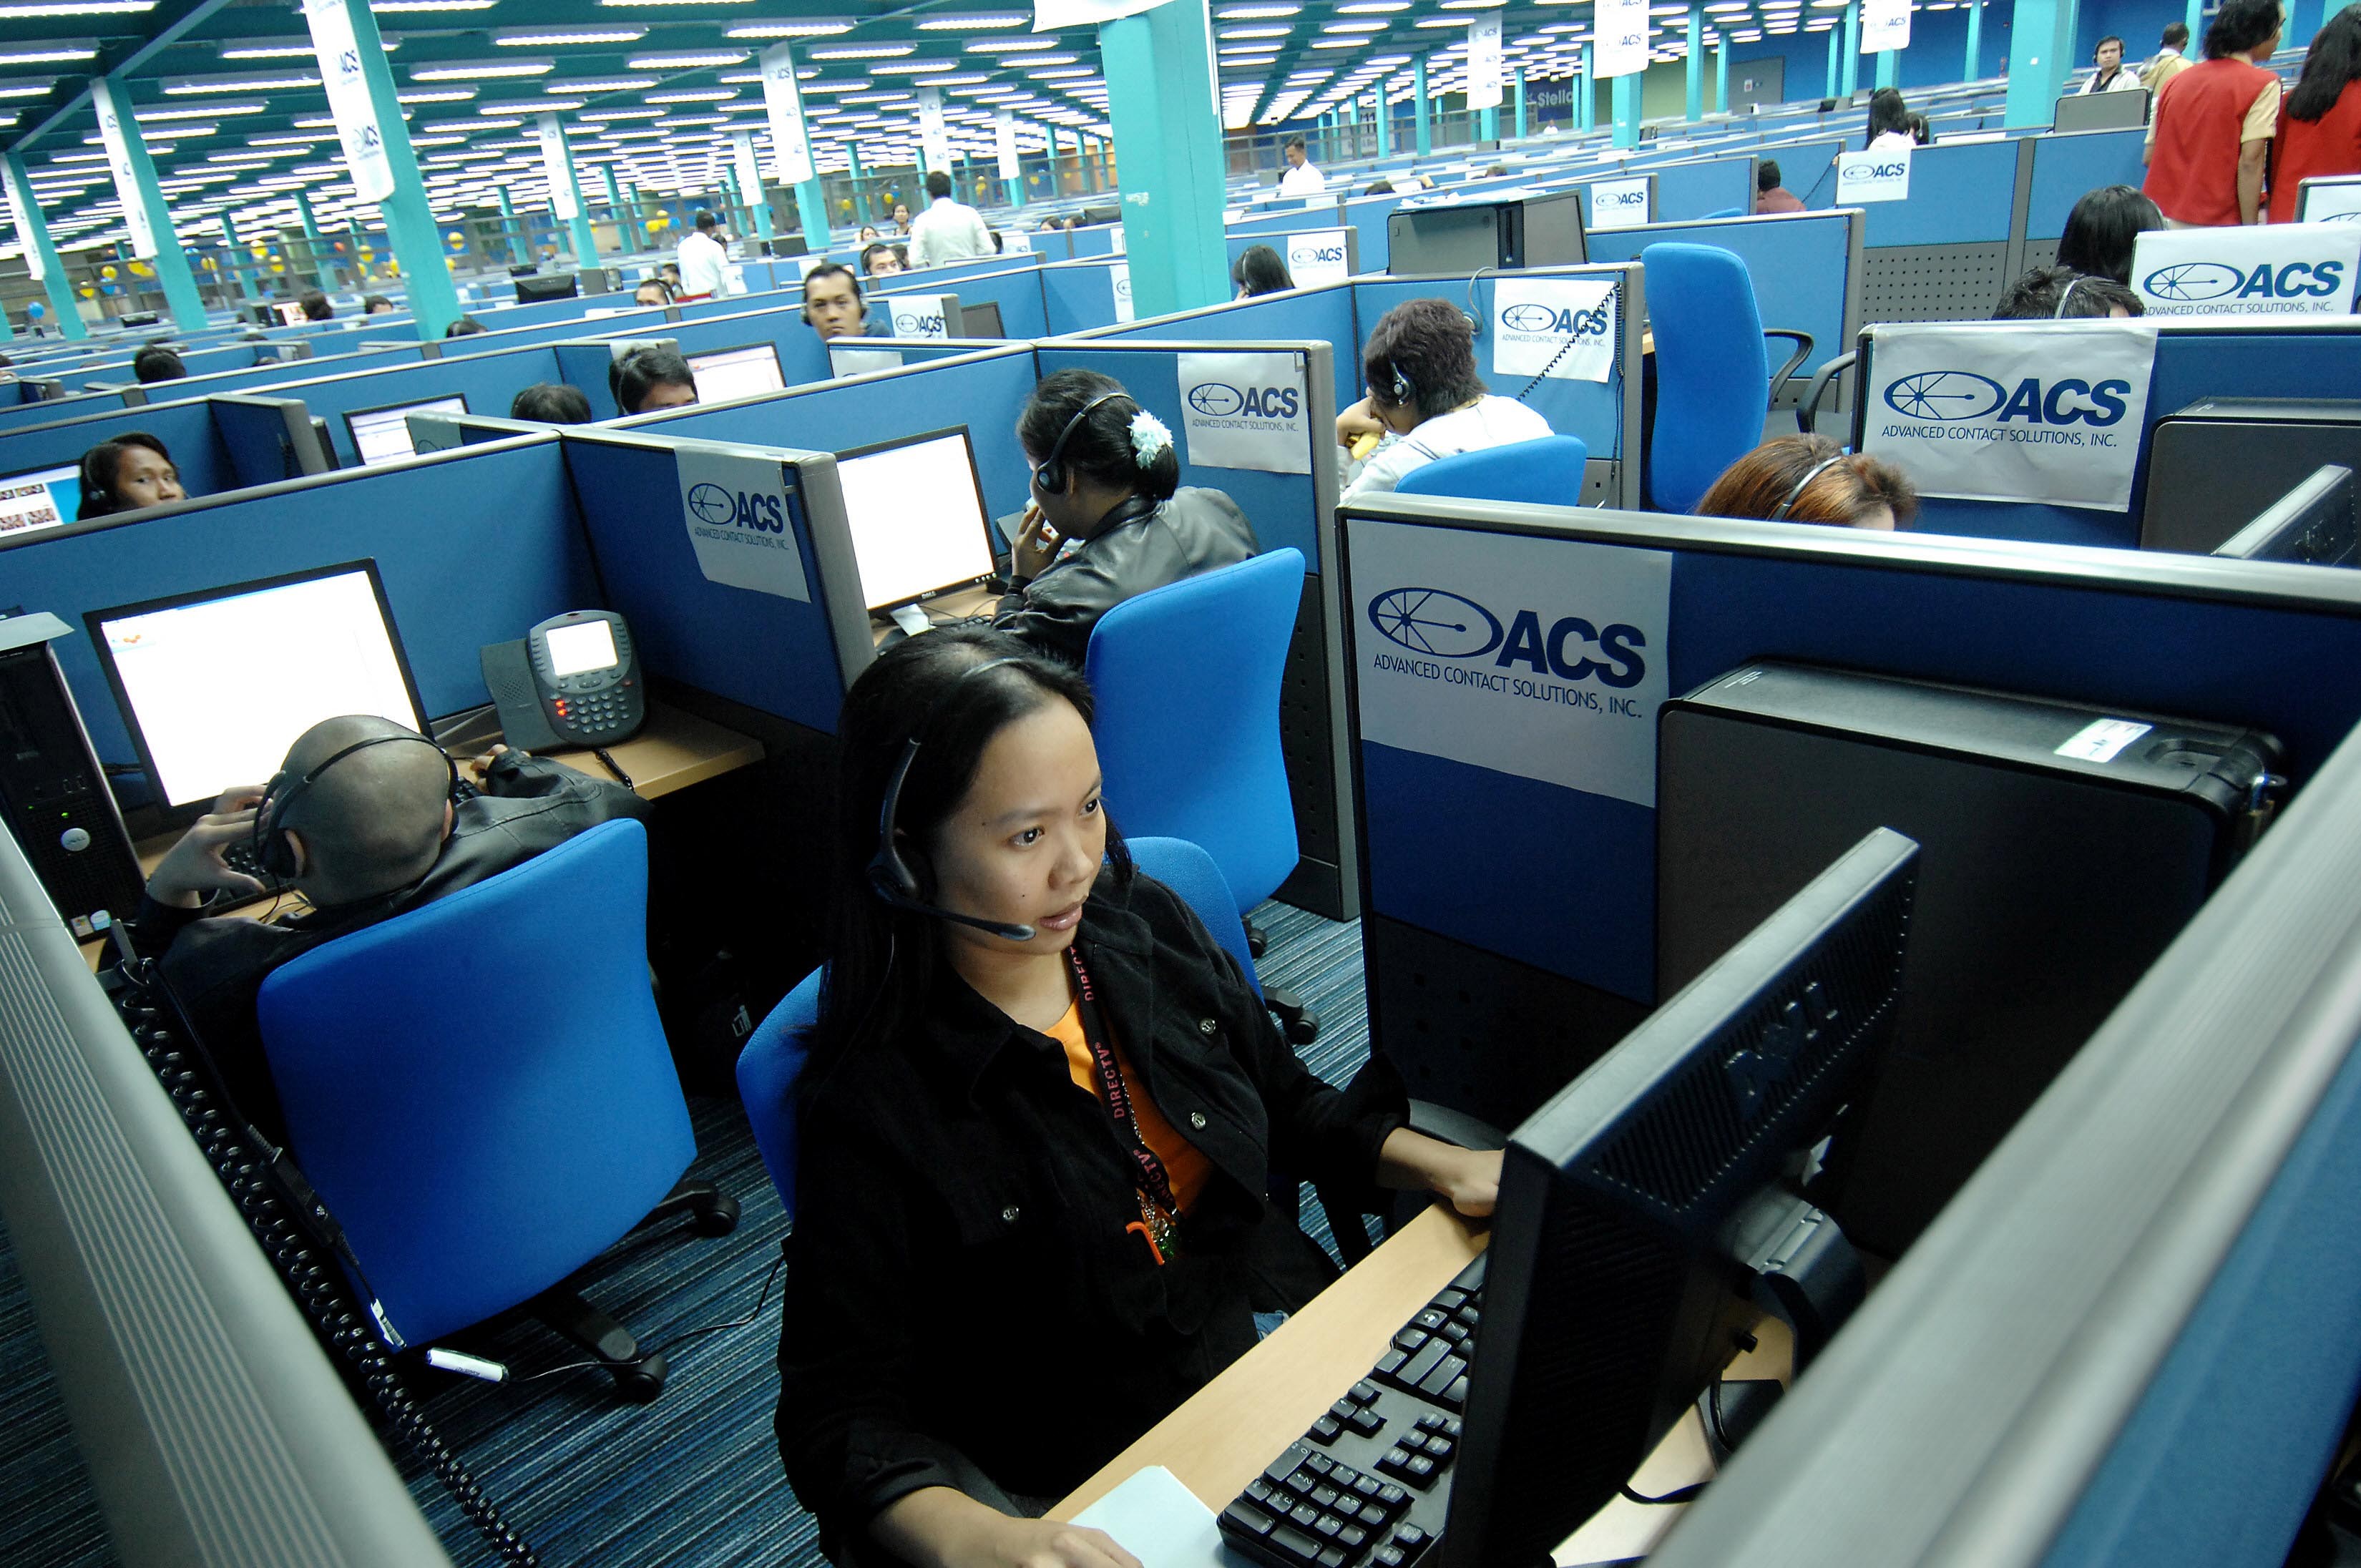 Agents attend to US clients at a call centre in Quezon City in Manila. The Philippines is preparing for the emergence of artificial intelligence technologies, which may threaten the business process outsourcing industry. Photo: AFP